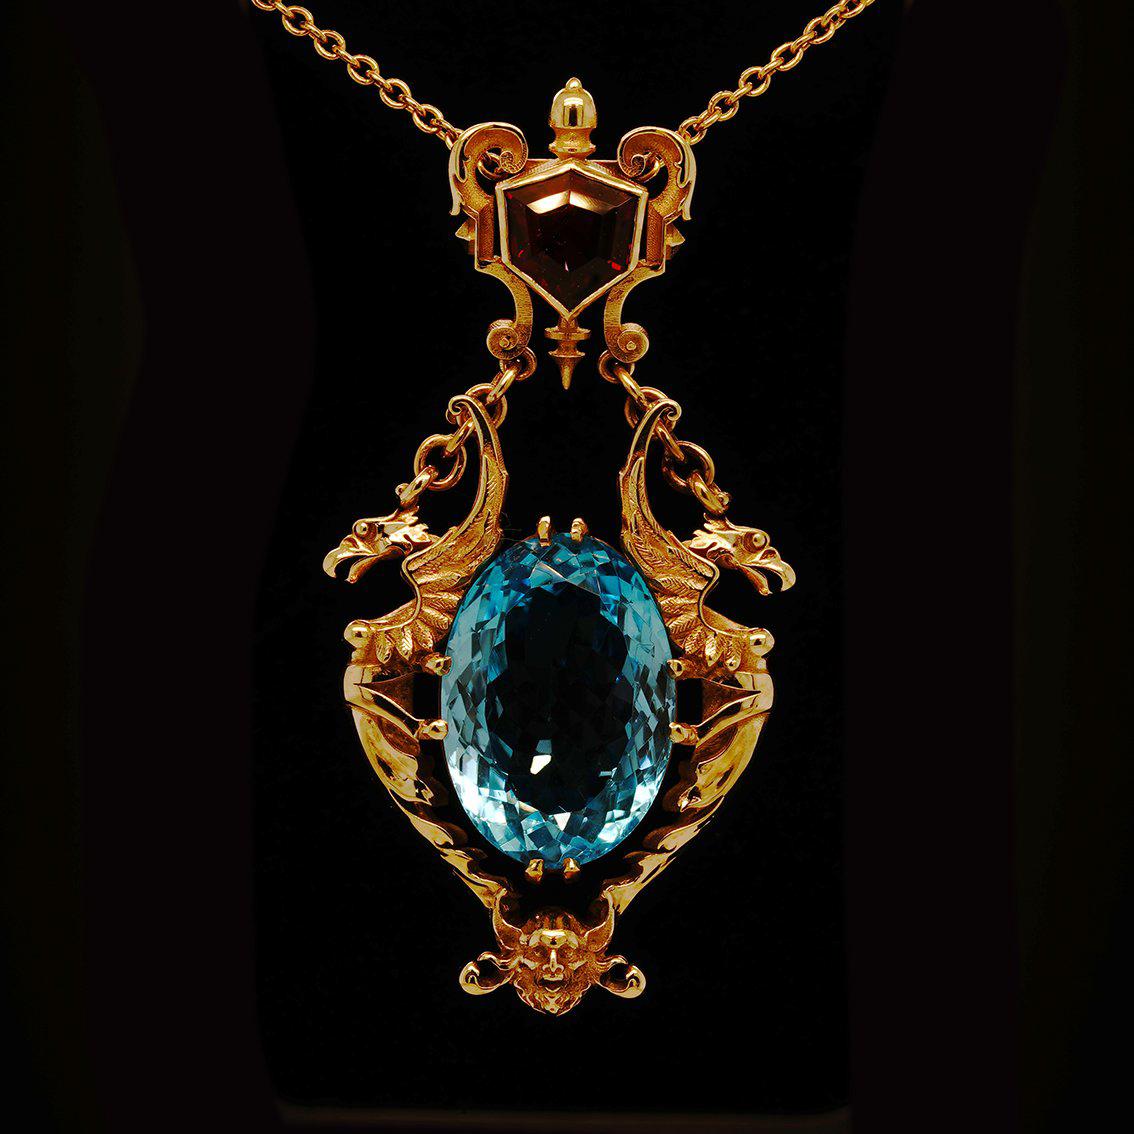 28ct Oval Swiss Blue Topaz, Garnet 9k Yellow Gold Antique Style Pendant Necklace For Sale 8